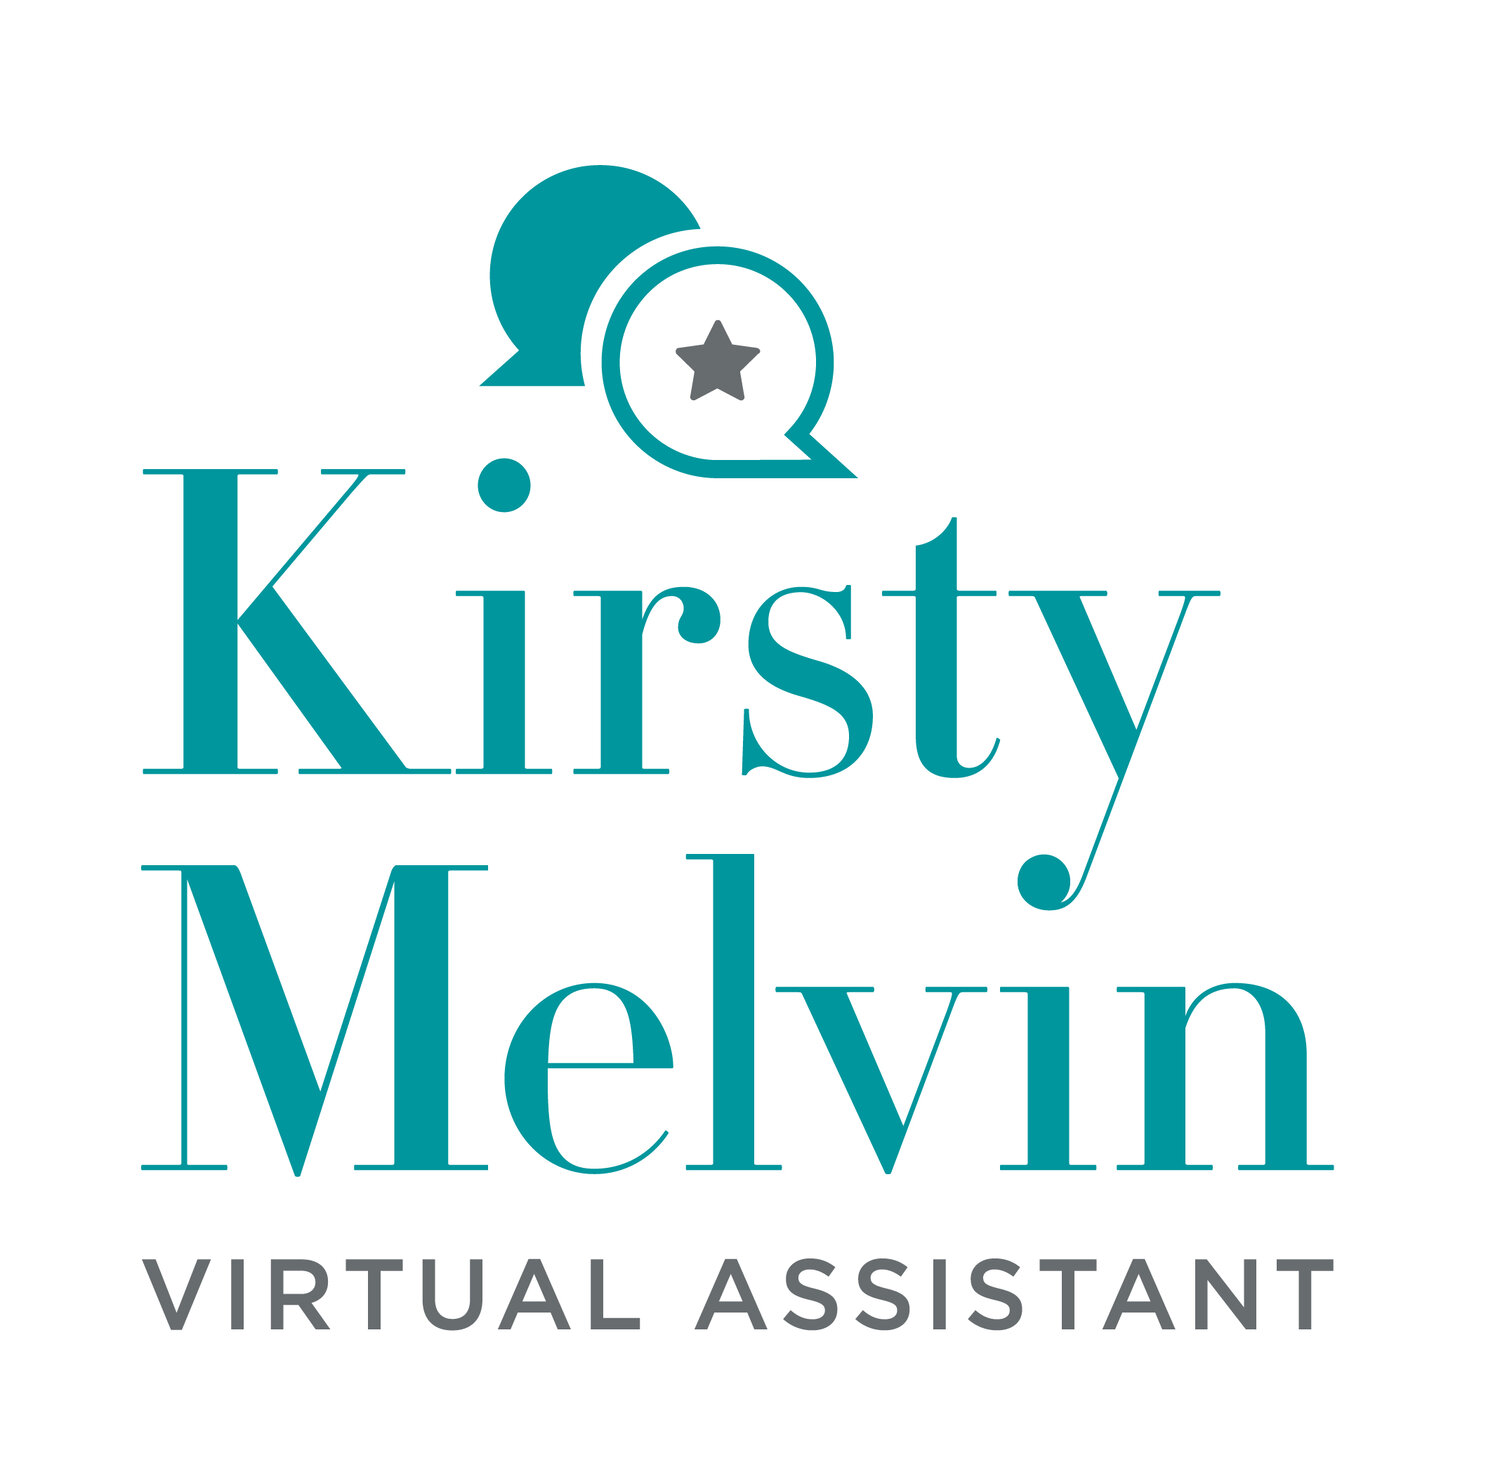 Kirsty Melvin Virtual Assistant